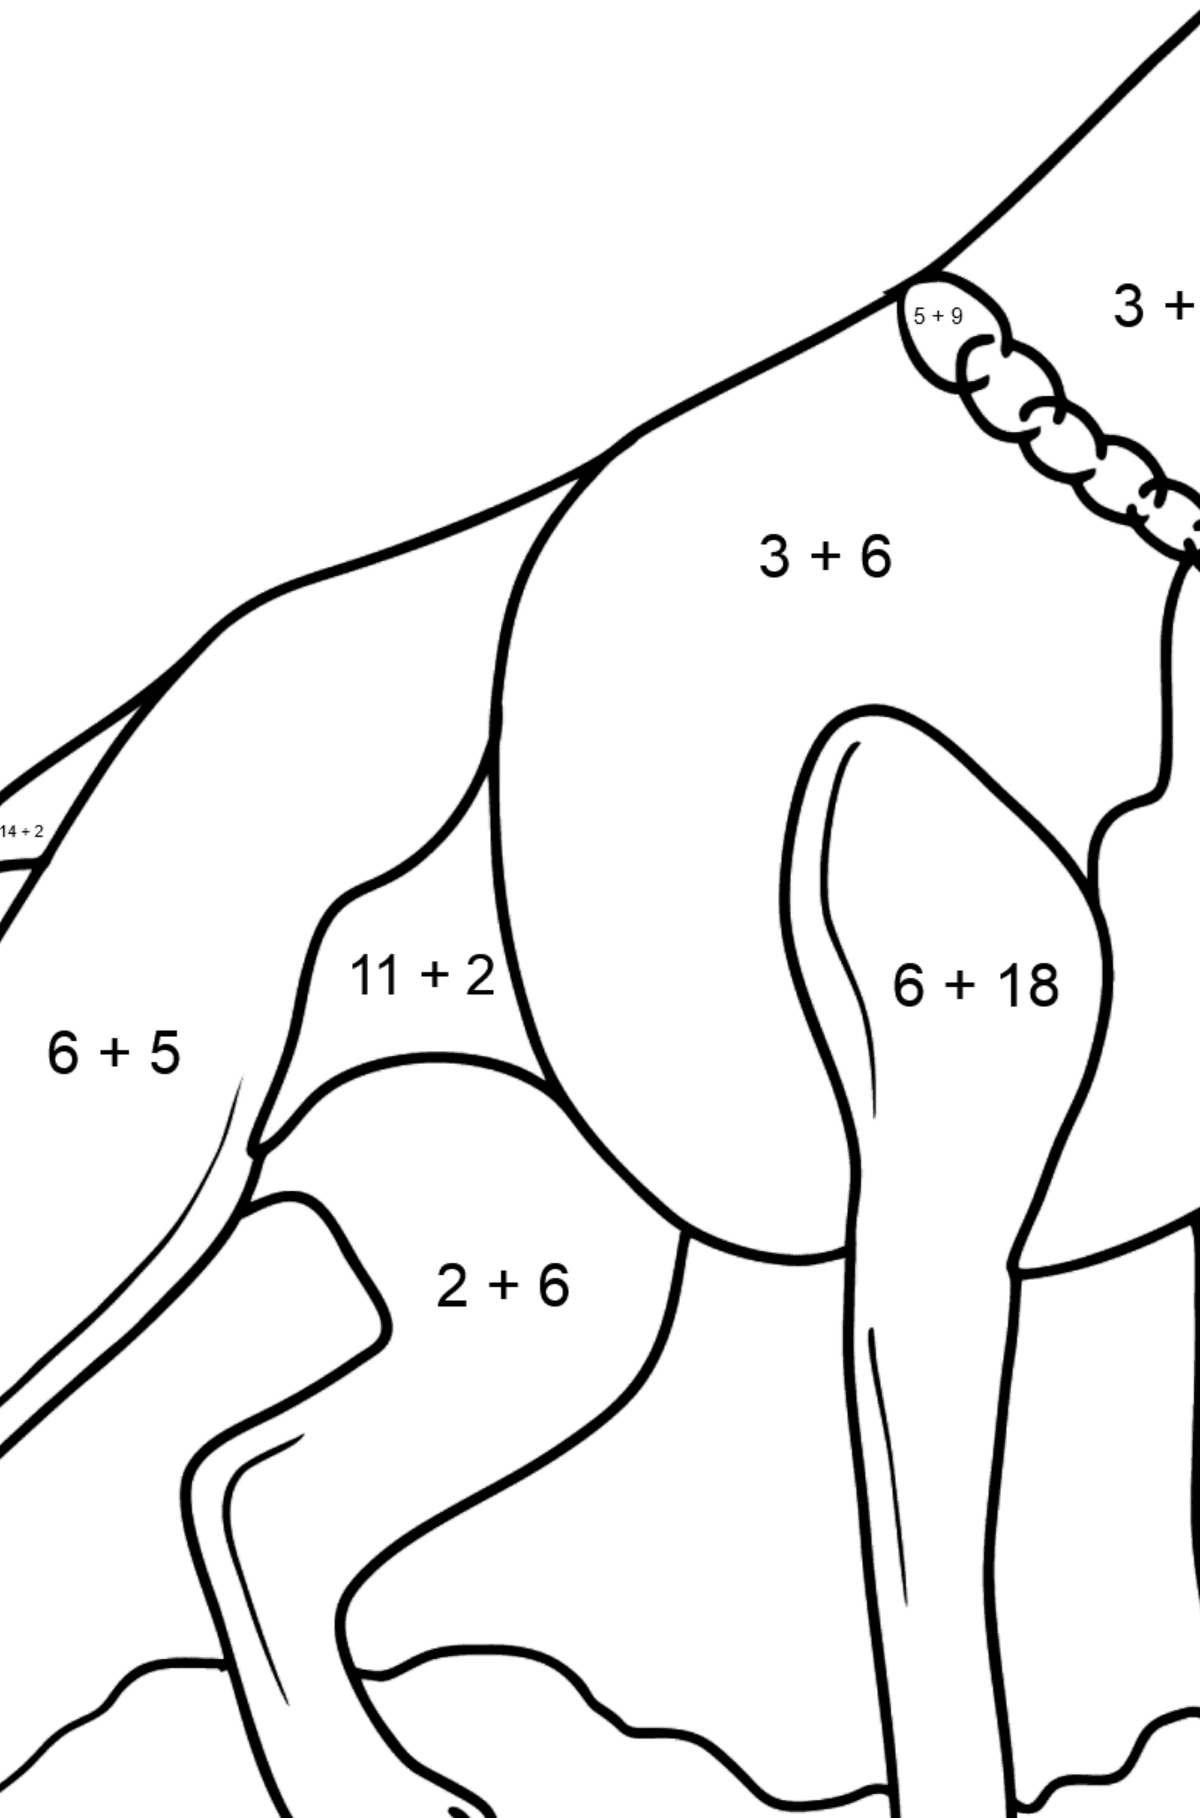 Boxer Dog coloring page - Math Coloring - Addition for Kids